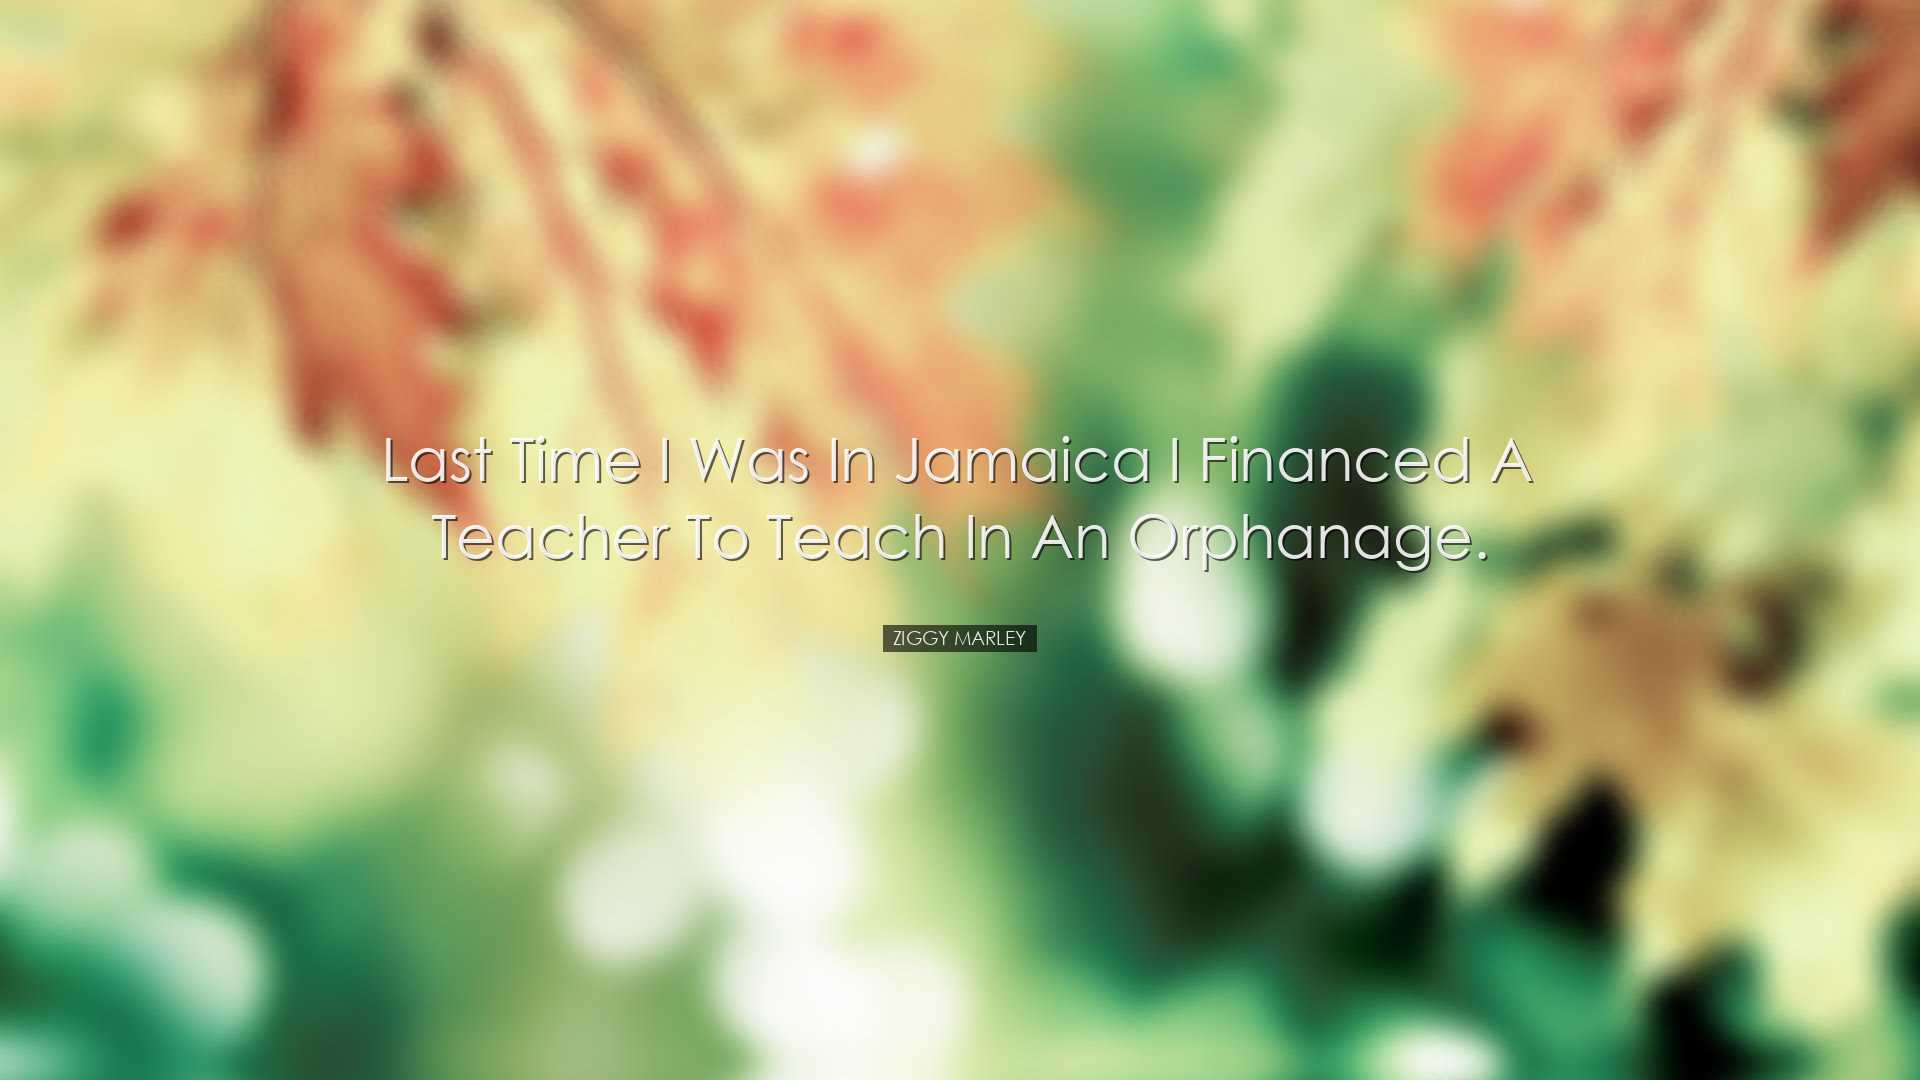 Last time I was in Jamaica I financed a teacher to teach in an orp